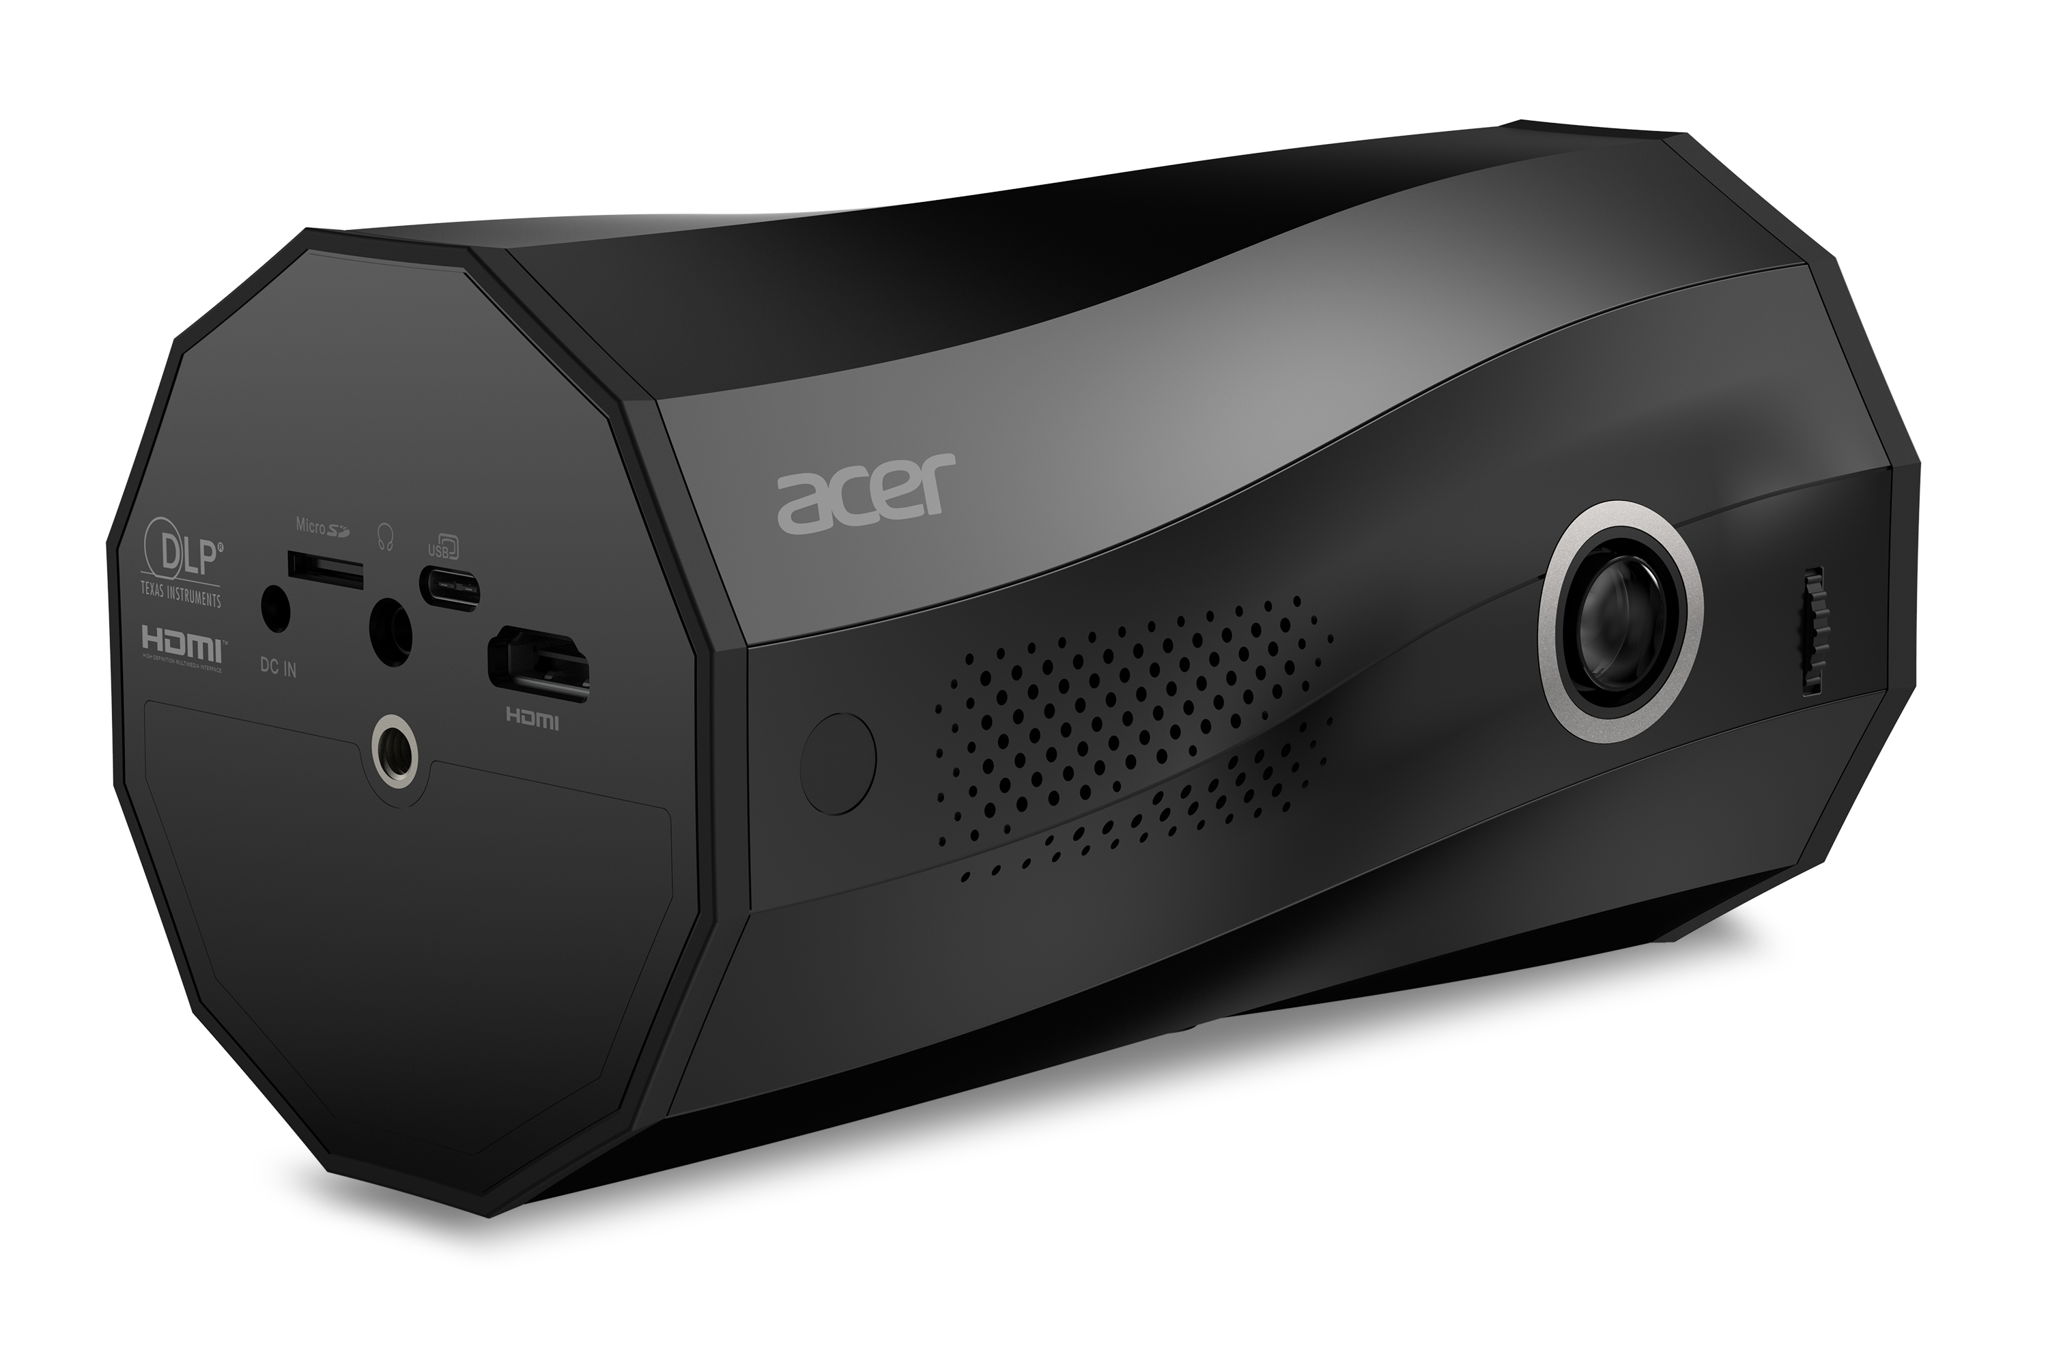 Acer Releases C250i Portable LED Projector with Multi-Angle